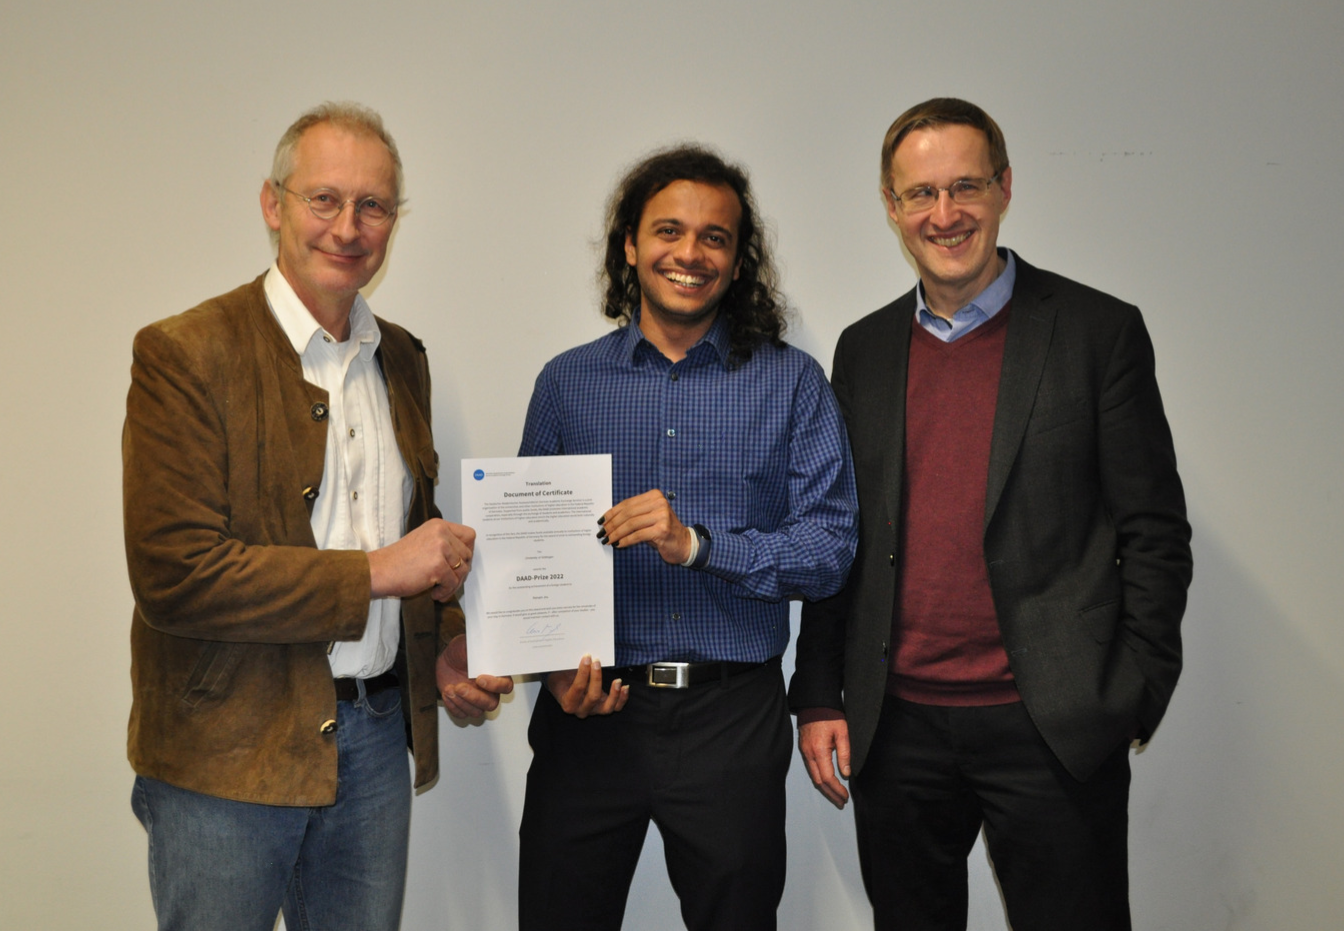 From left to right: Professor Christian Ammer (Vice-President for Student and Academic Services), Rishabh Jha (winner 2022 DAAD prize for outstanding international students), and Professor Stefan Kehrein (Institute for Theoretical Physics)